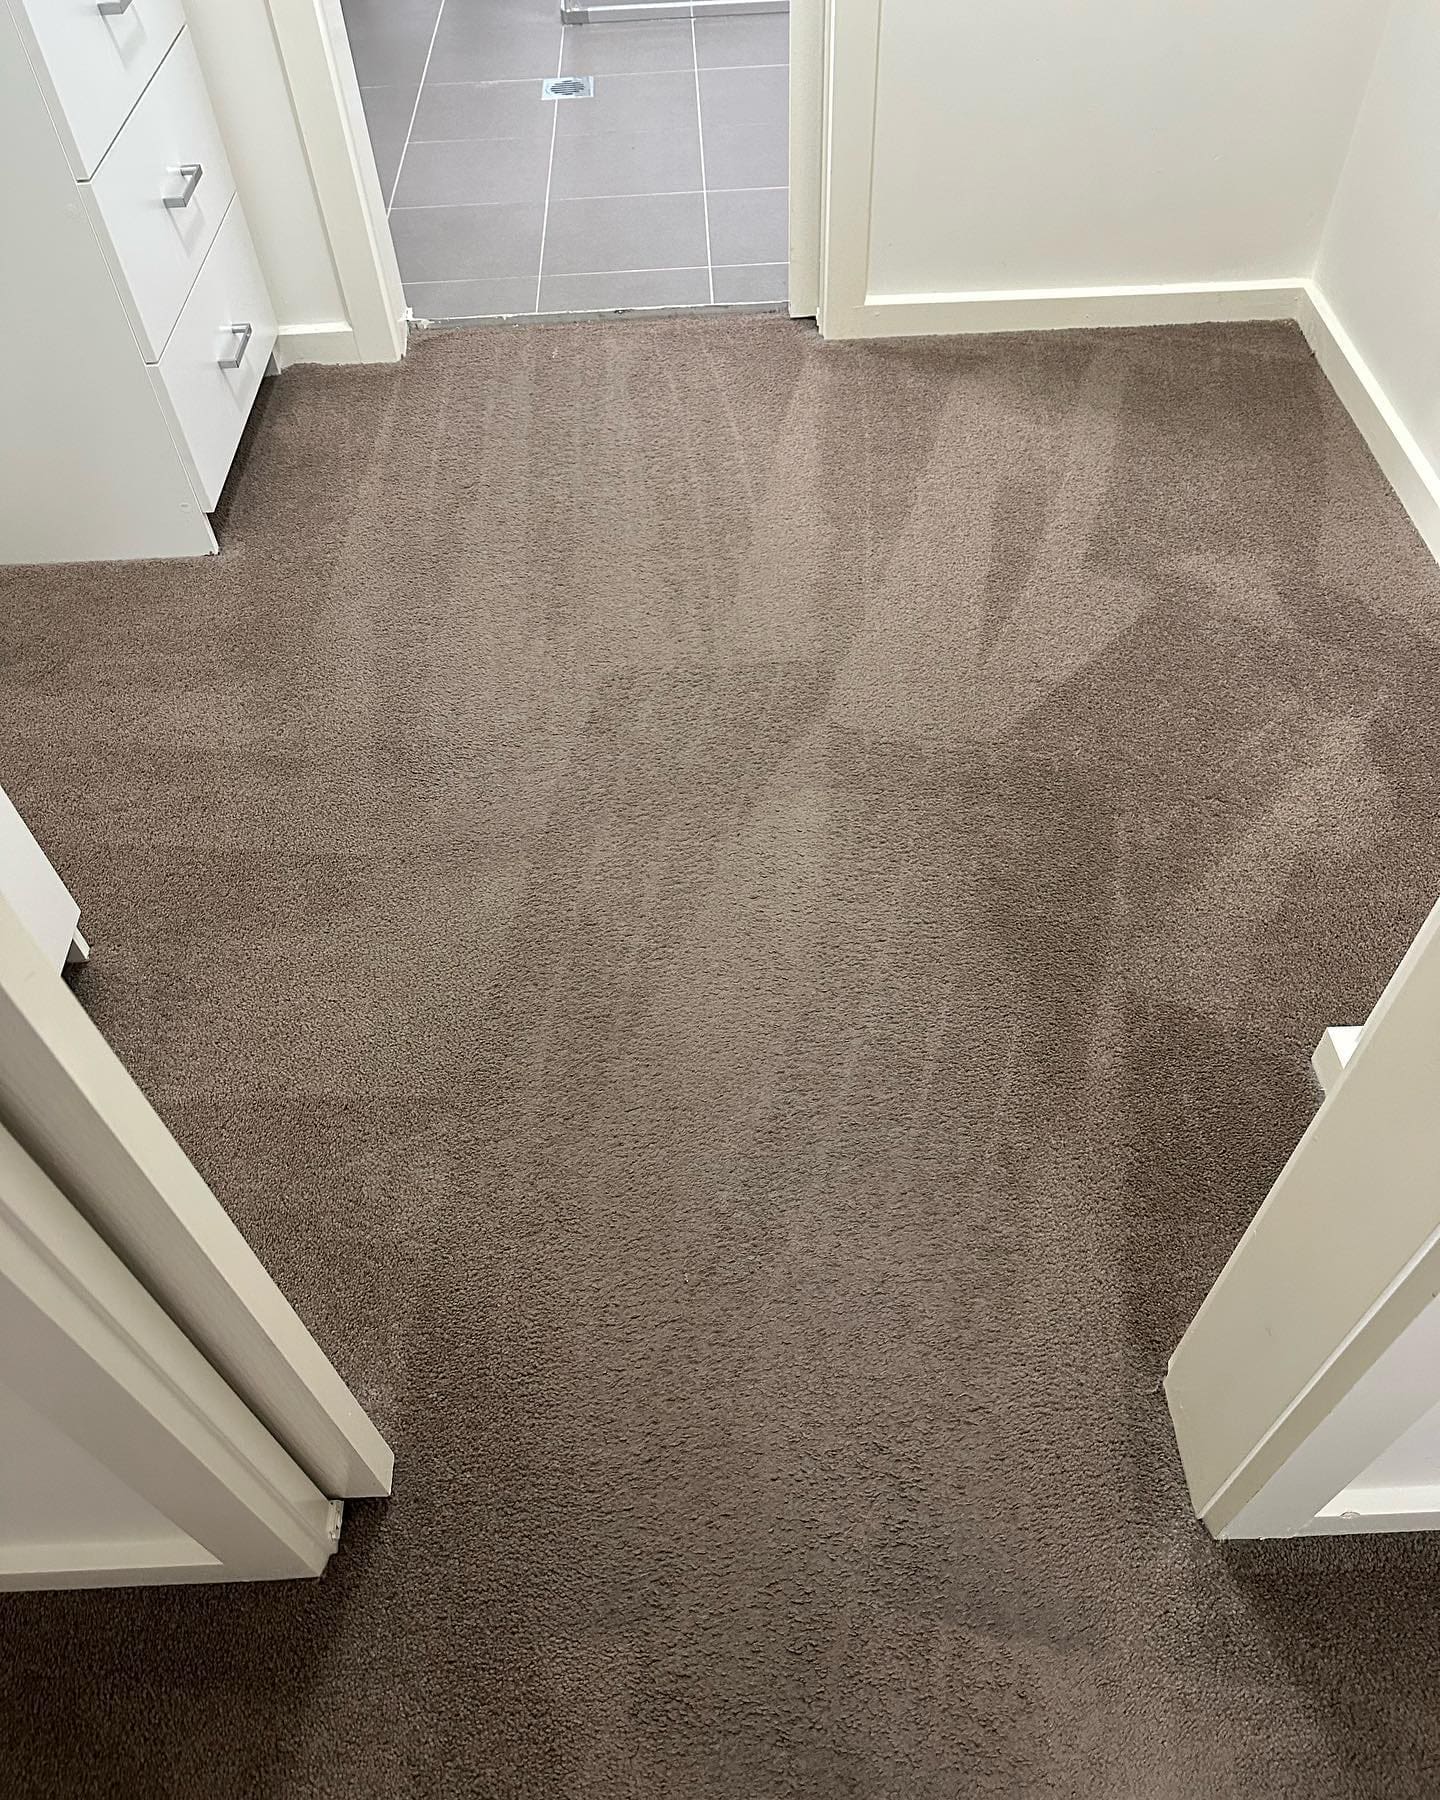 Professional carpet cleaning in Penrith. Carpet care in Sydney